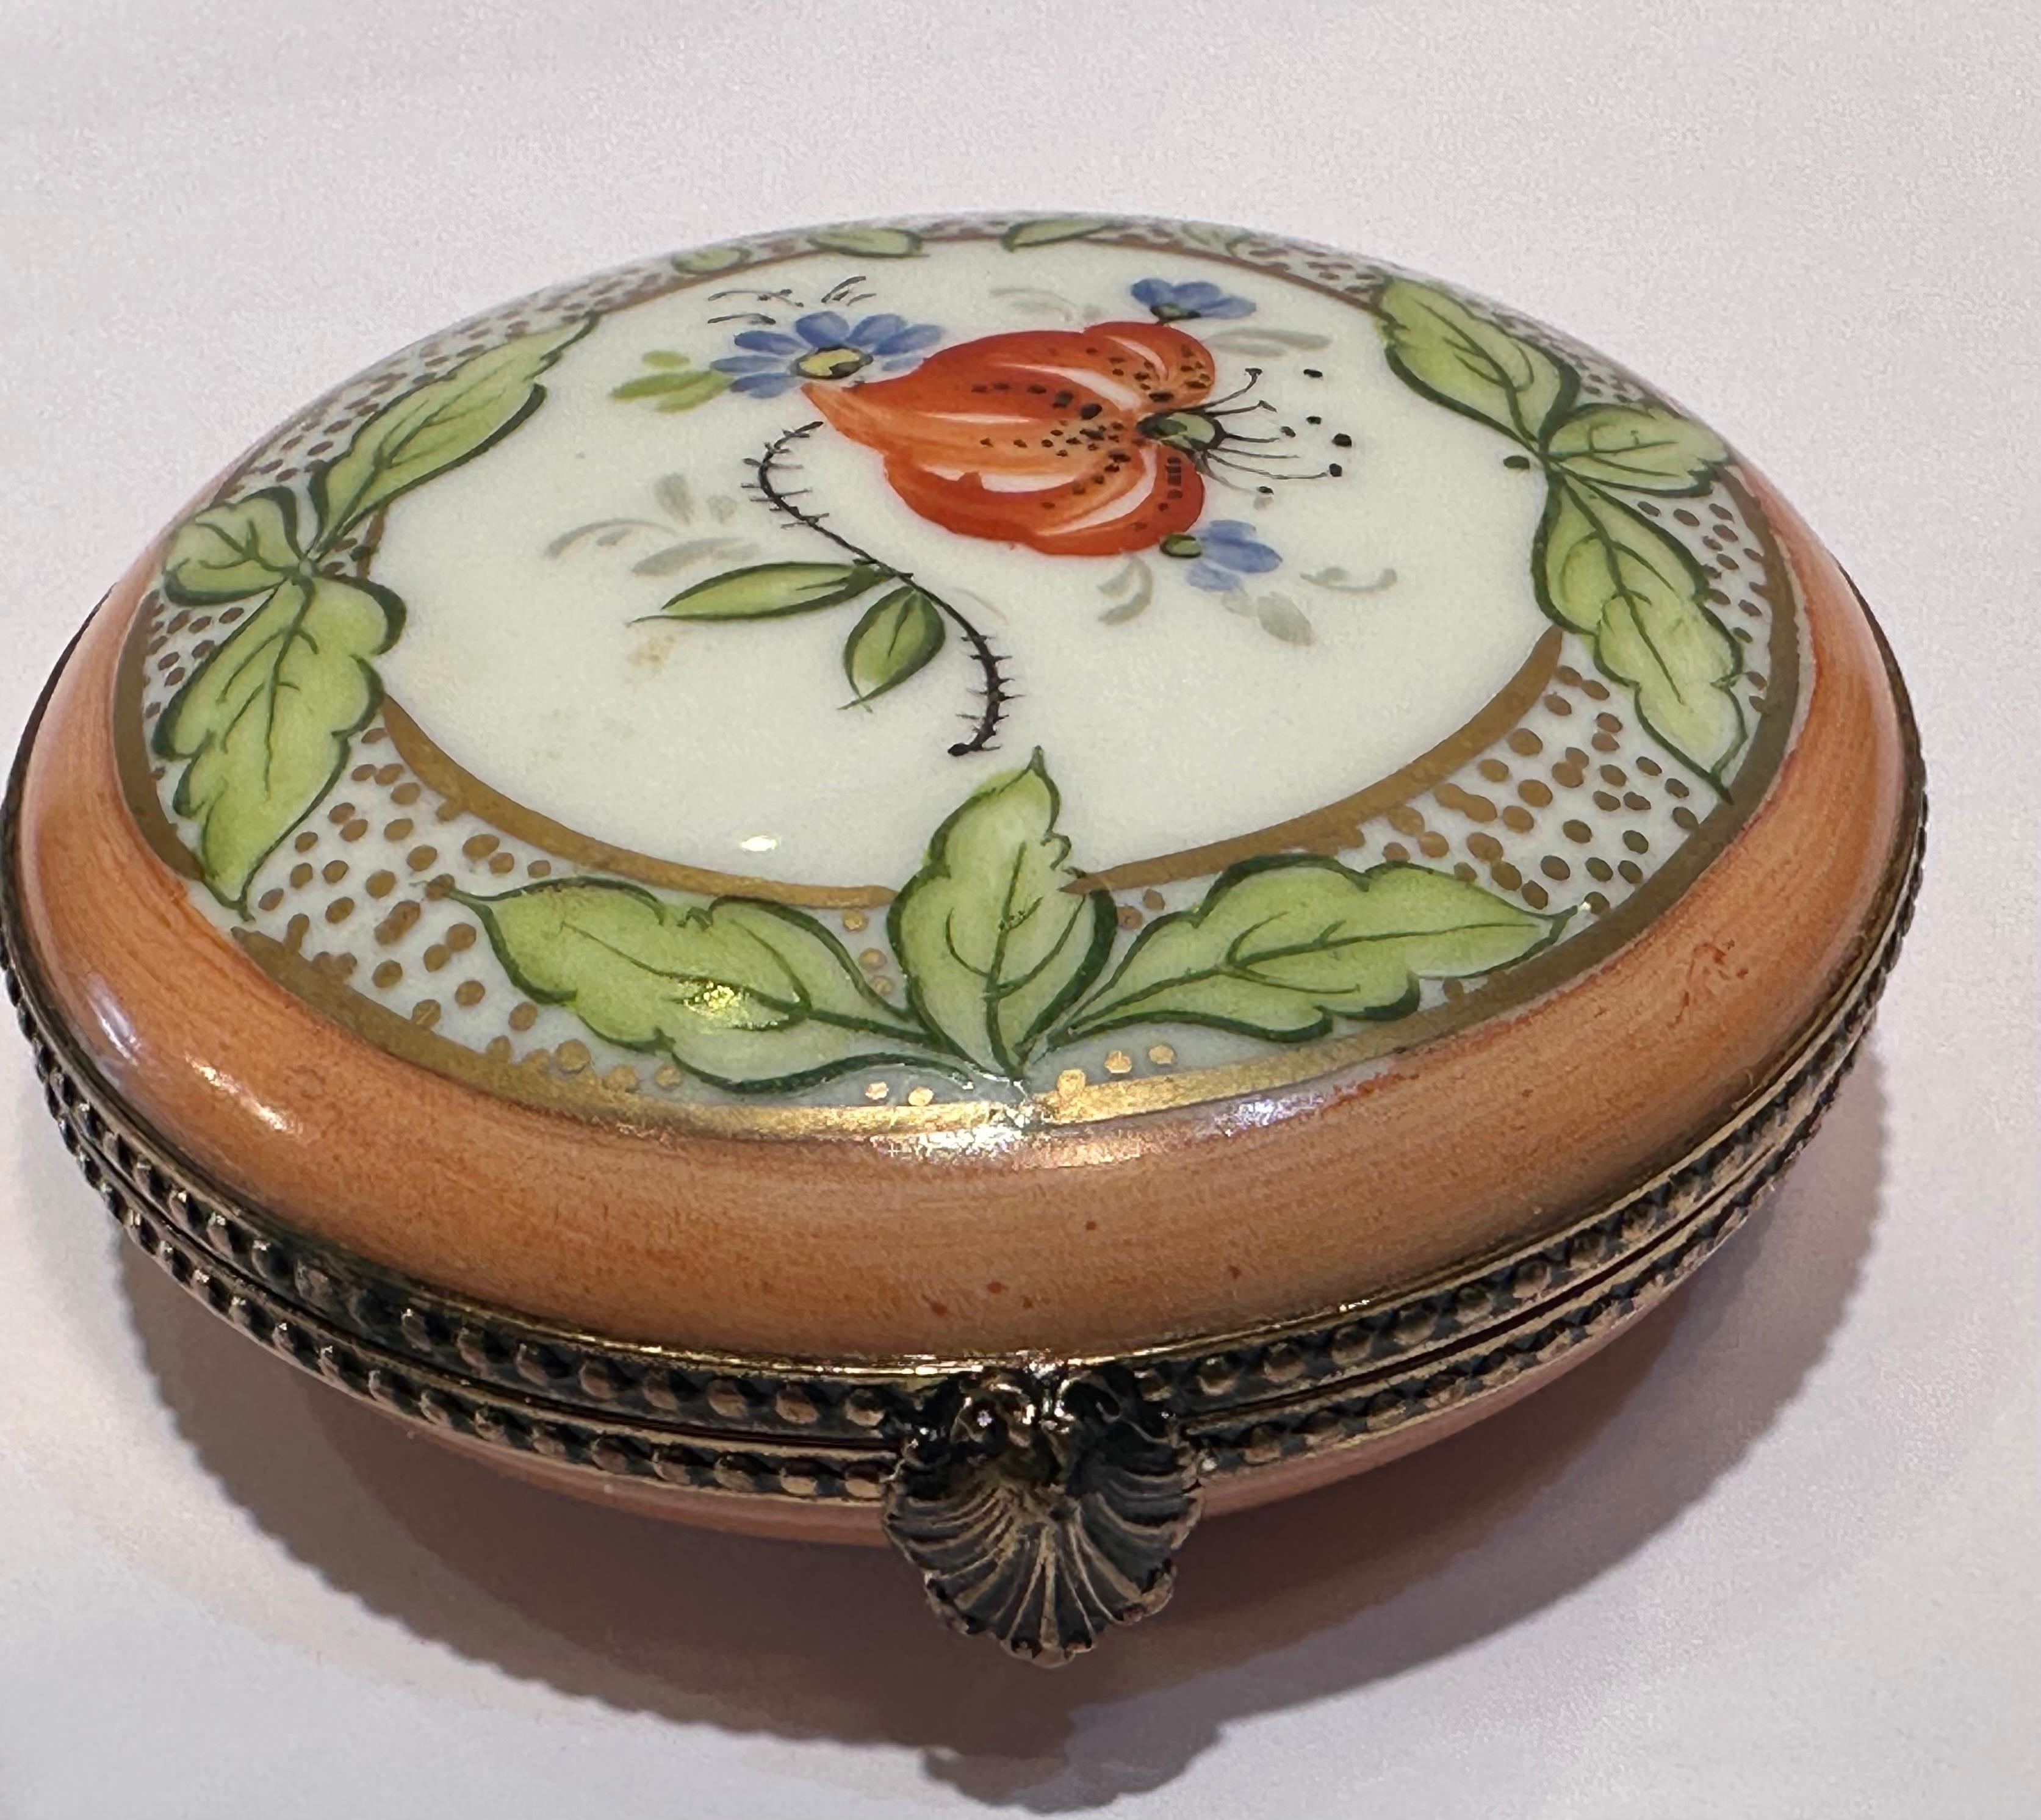 Beautiful Limoges porcelain circular shaped trinket box is handmade with a peach and white background and is skillfully hand painted with a floral and leaf motif and richly accented with 24-karat gold dots and trim. Box features antiqued metal